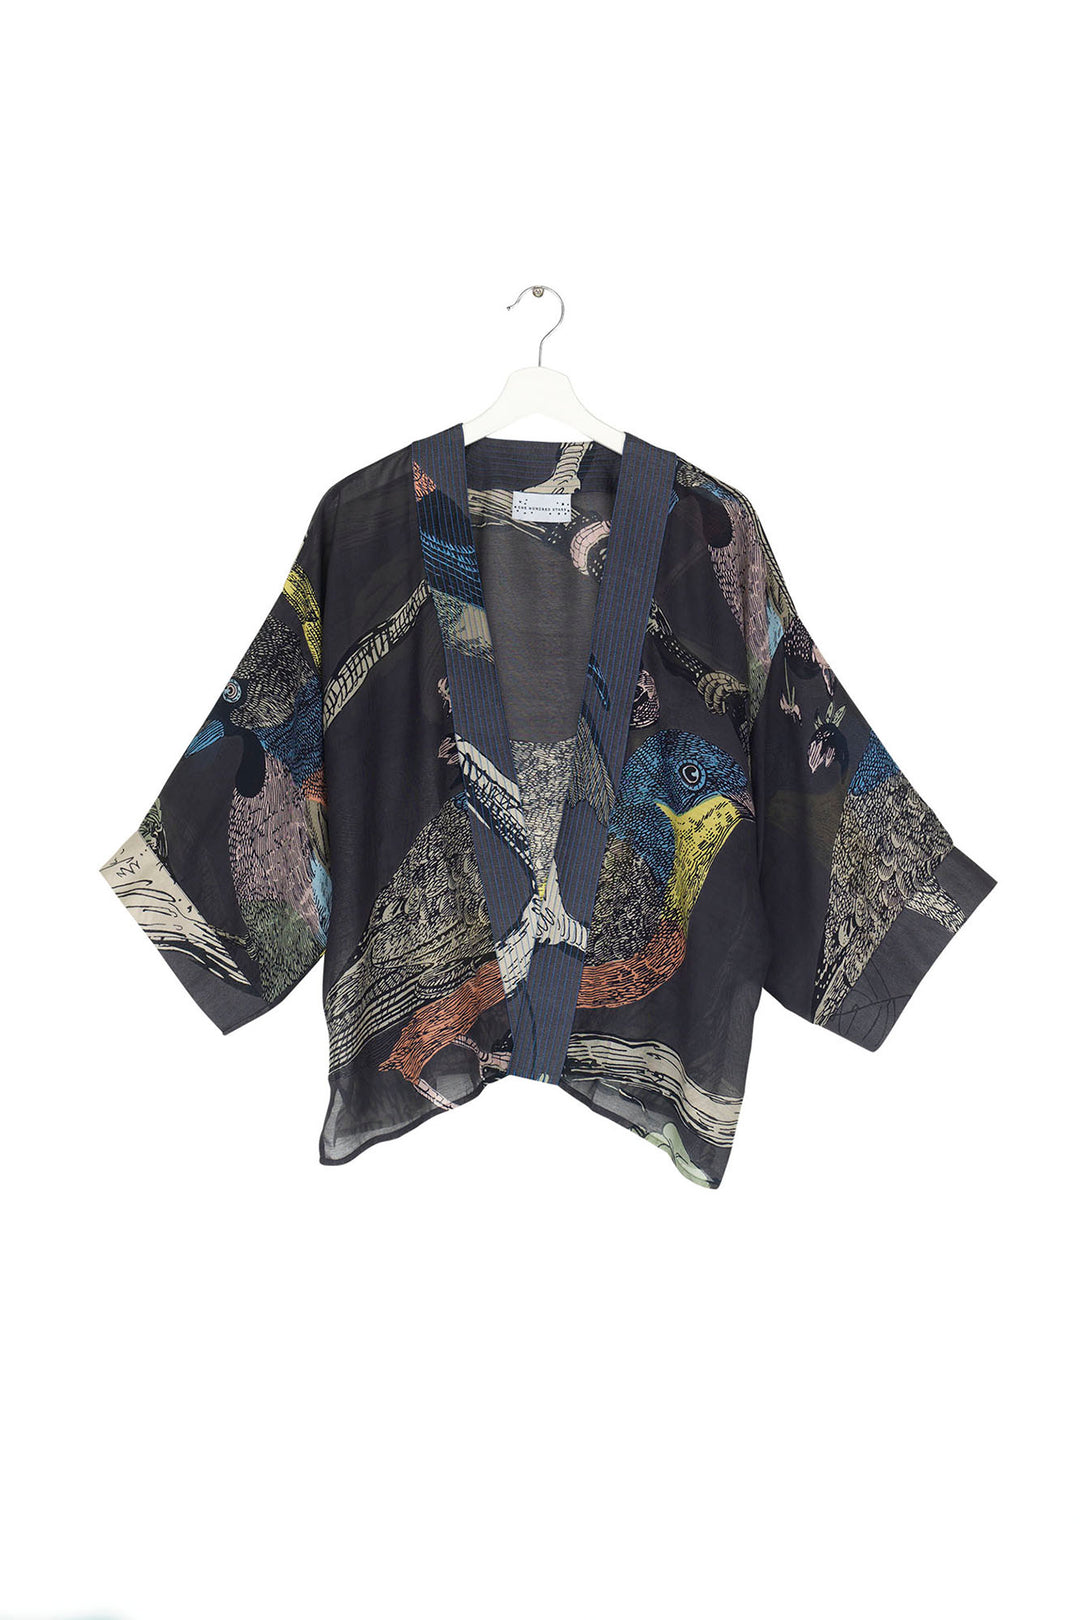 ladies short kimono jacket with a colourful bird print on a dark navy background by One Hundred Stars